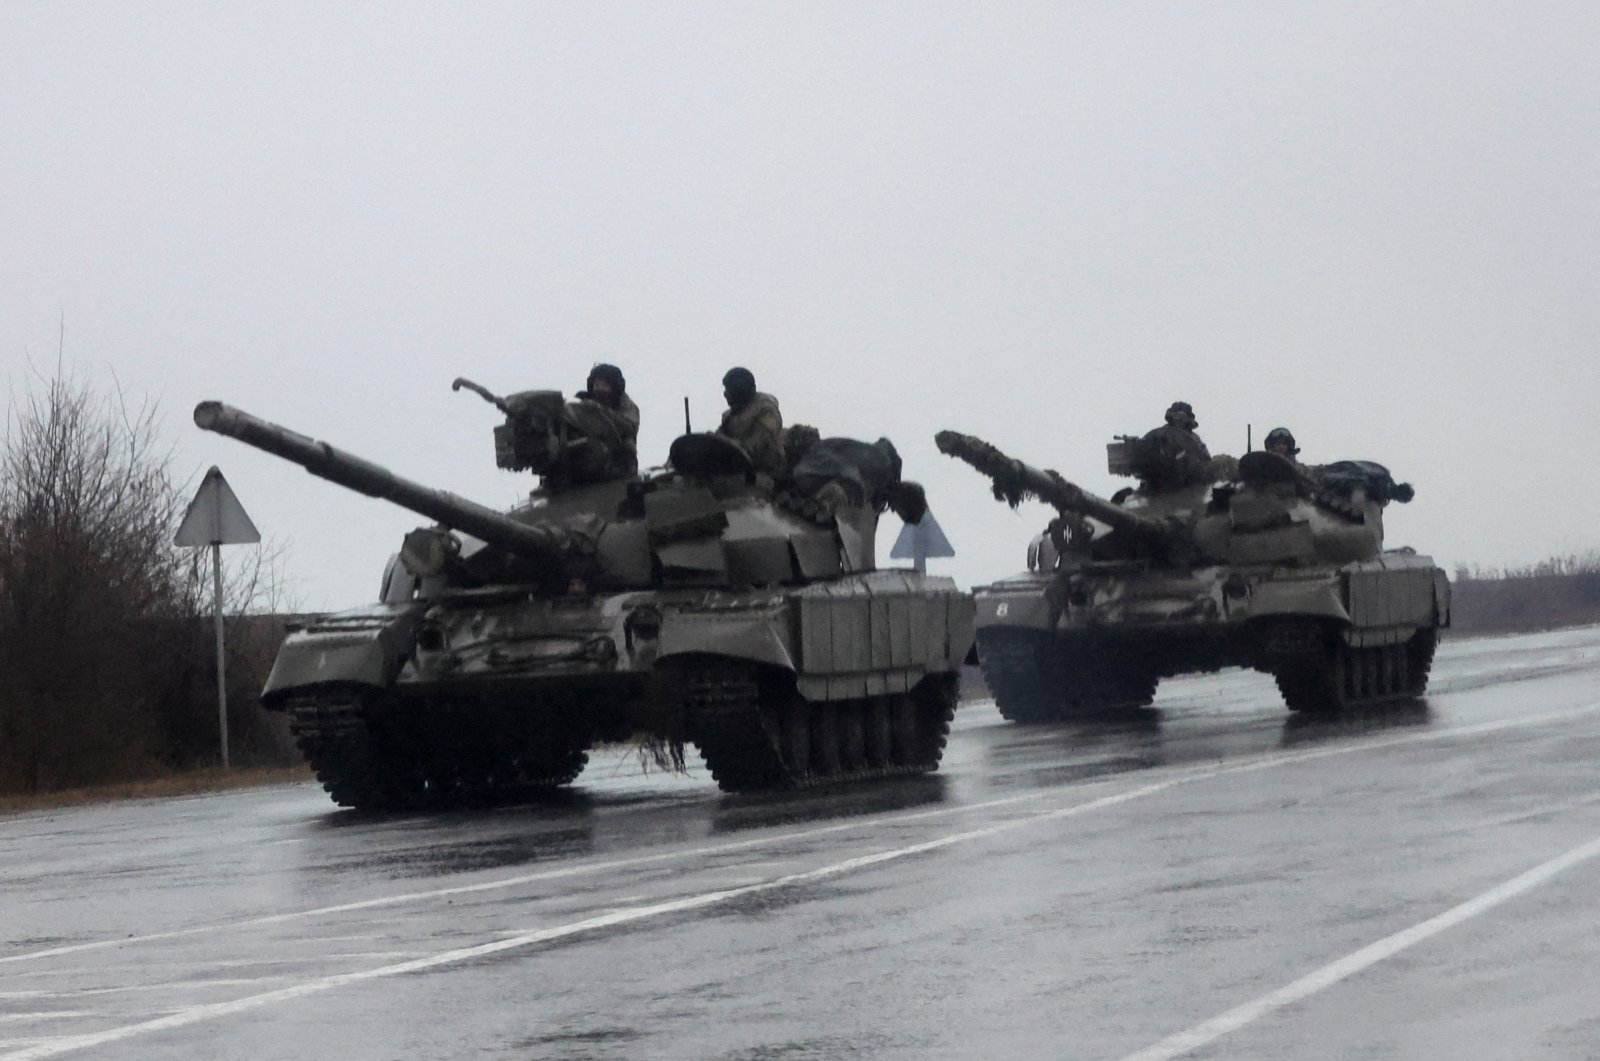 Ukrainian tanks move into the city, after Russian President Vladimir Putin authorized a military operation in eastern Ukraine, in Mariupol, Feb. 24, 2022. (Reuters Photo)